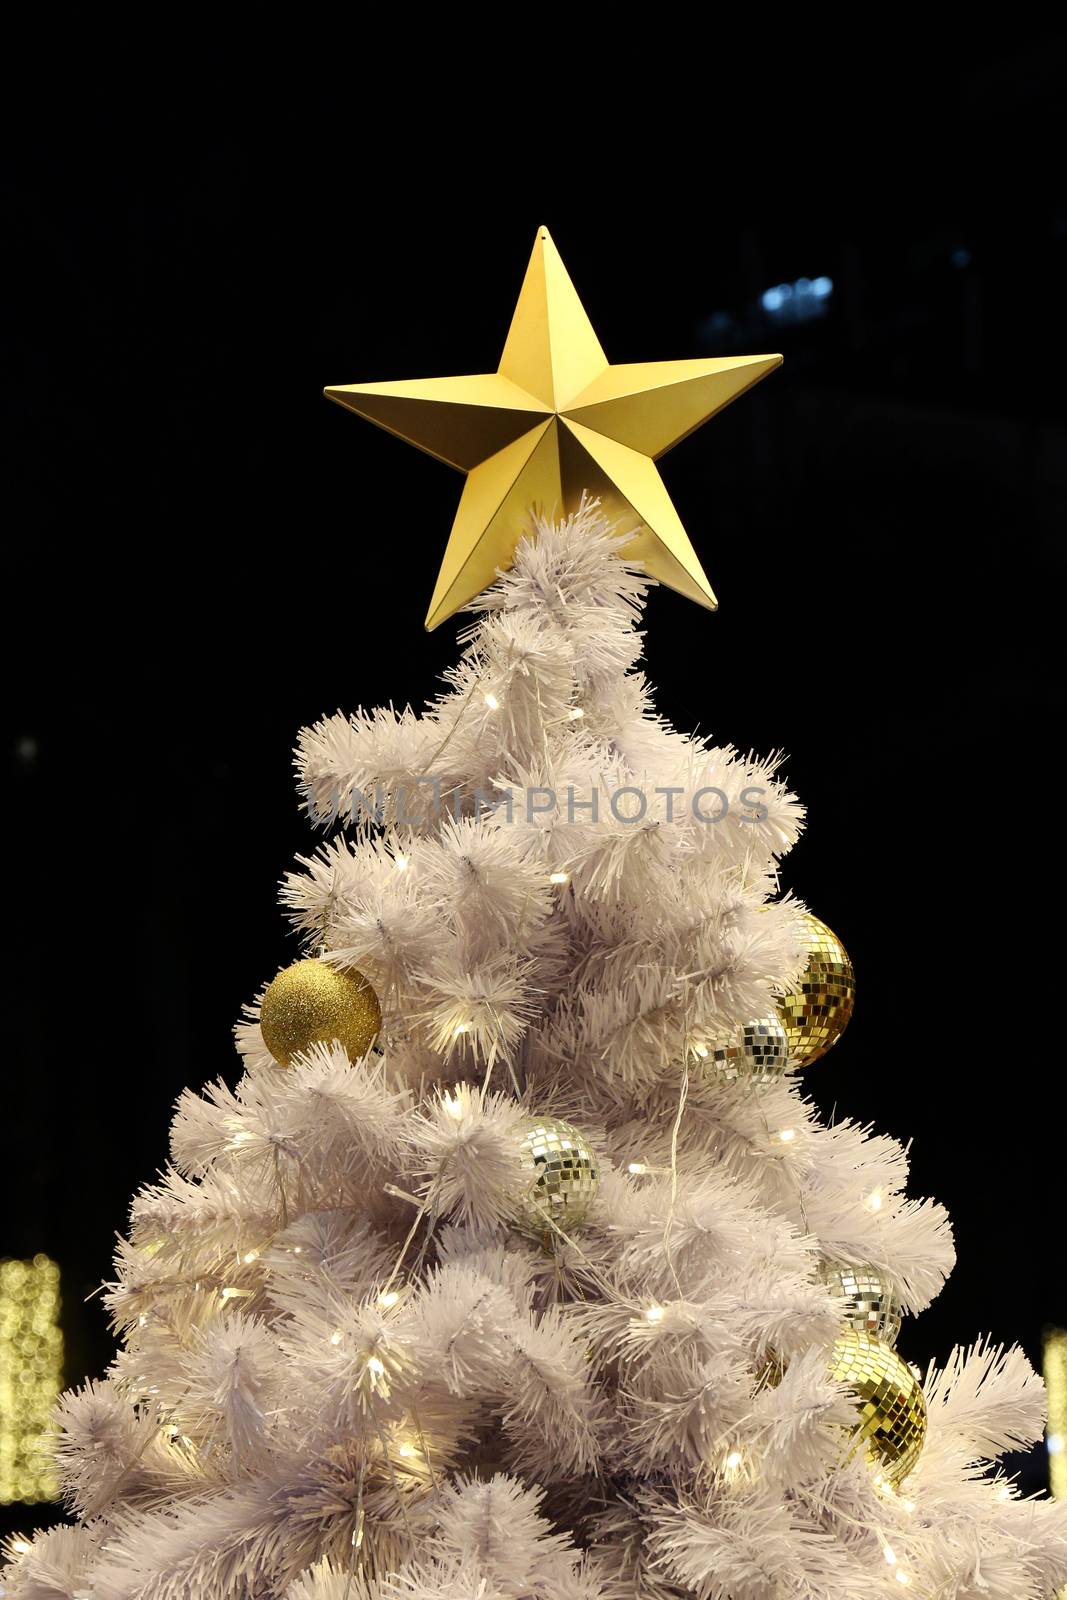 Golden Star and ball decoration on white Christmas tree background night (selective focus) by cgdeaw